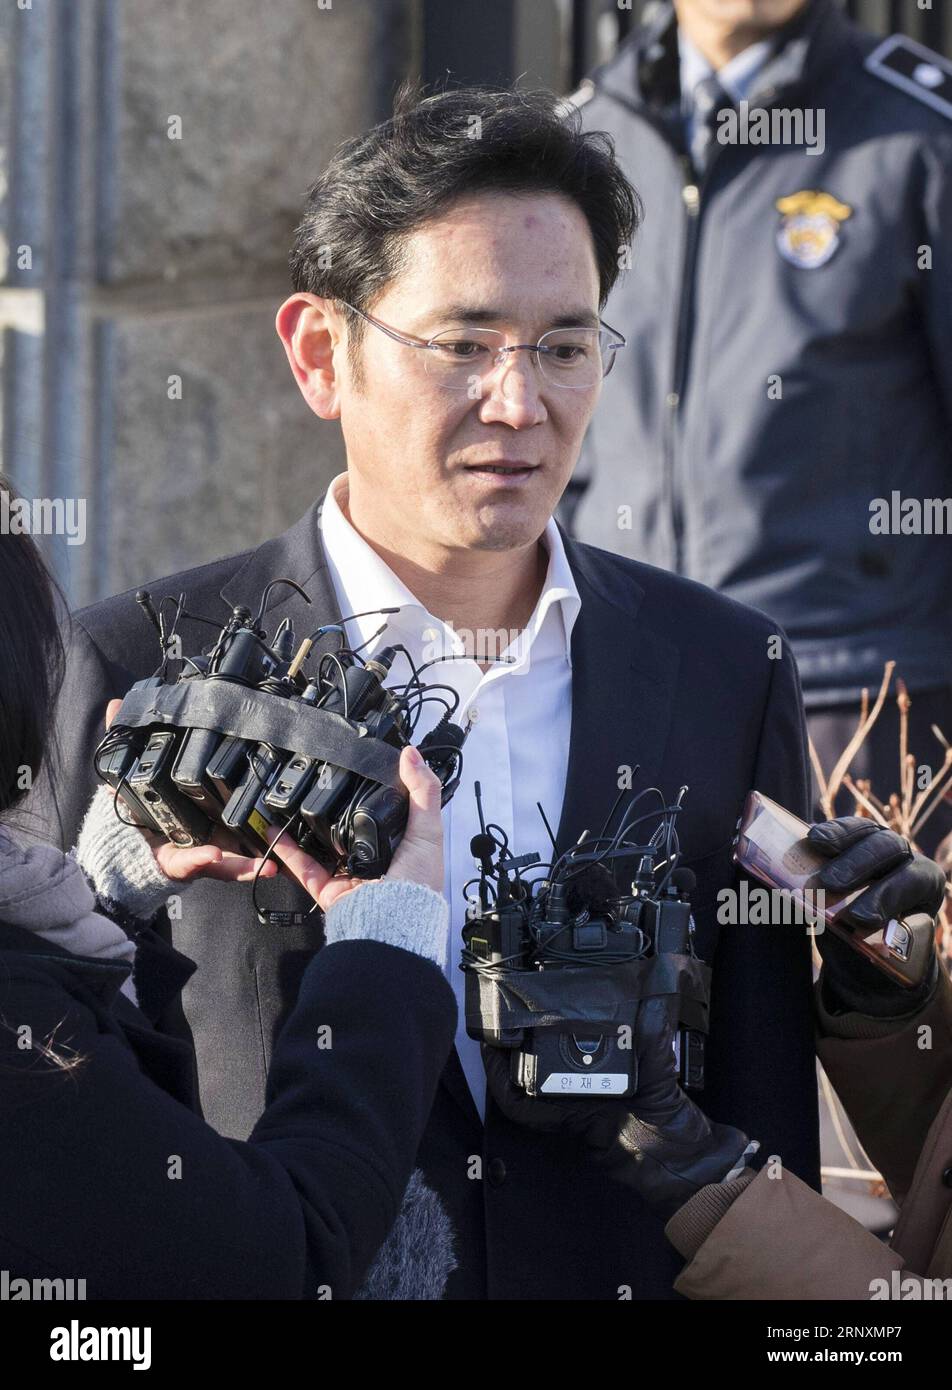 (180205) -- UIWANG, Feb. 5, 2018 -- Lee Jae-yong, vice chairman of Samsung Electronics, speaks to the media outside a detention center in Uiwang, South Korea, on Feb. 5, 2018. A judge at the Seoul High Court Monday sentenced Lee Jae-yong, an heir apparent of Samsung Group, the country s biggest family-controlled conglomerate, to two and a half years in prison with a stay of execution for four years. ) (zjl) SOUTH KOREA-UIWANG-SAMSUNG-HEIR-SENTENCE LeexSang-ho PUBLICATIONxNOTxINxCHN Stock Photo